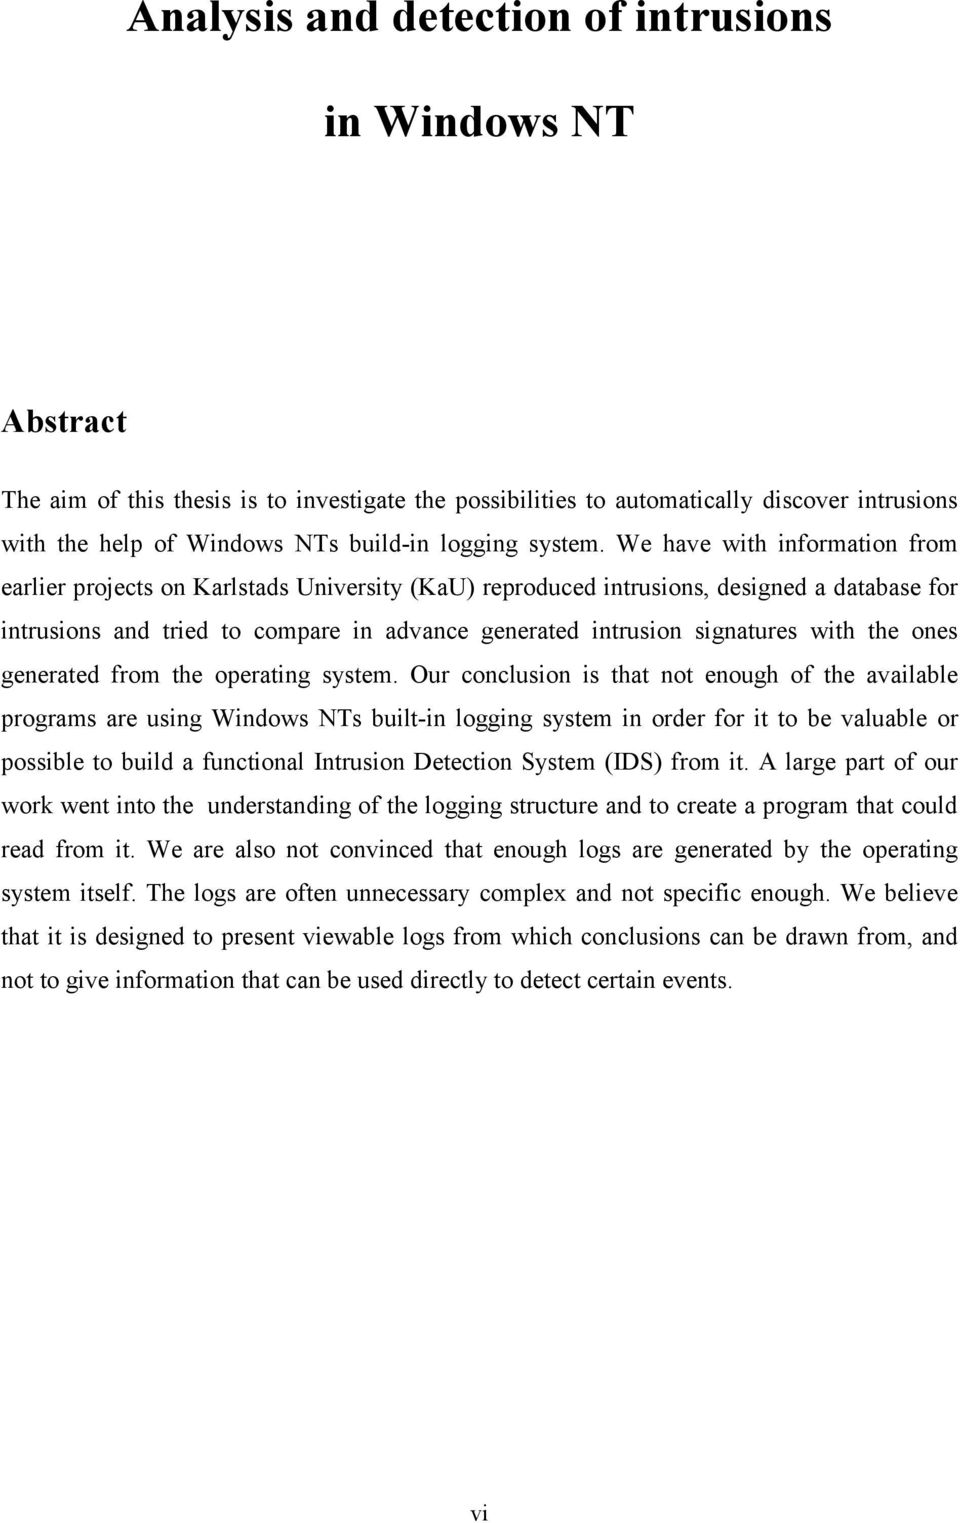 We have with information from earlier projects on Karlstads University (KaU) reproduced intrusions, designed a database for intrusions and tried to compare in advance generated intrusion signatures